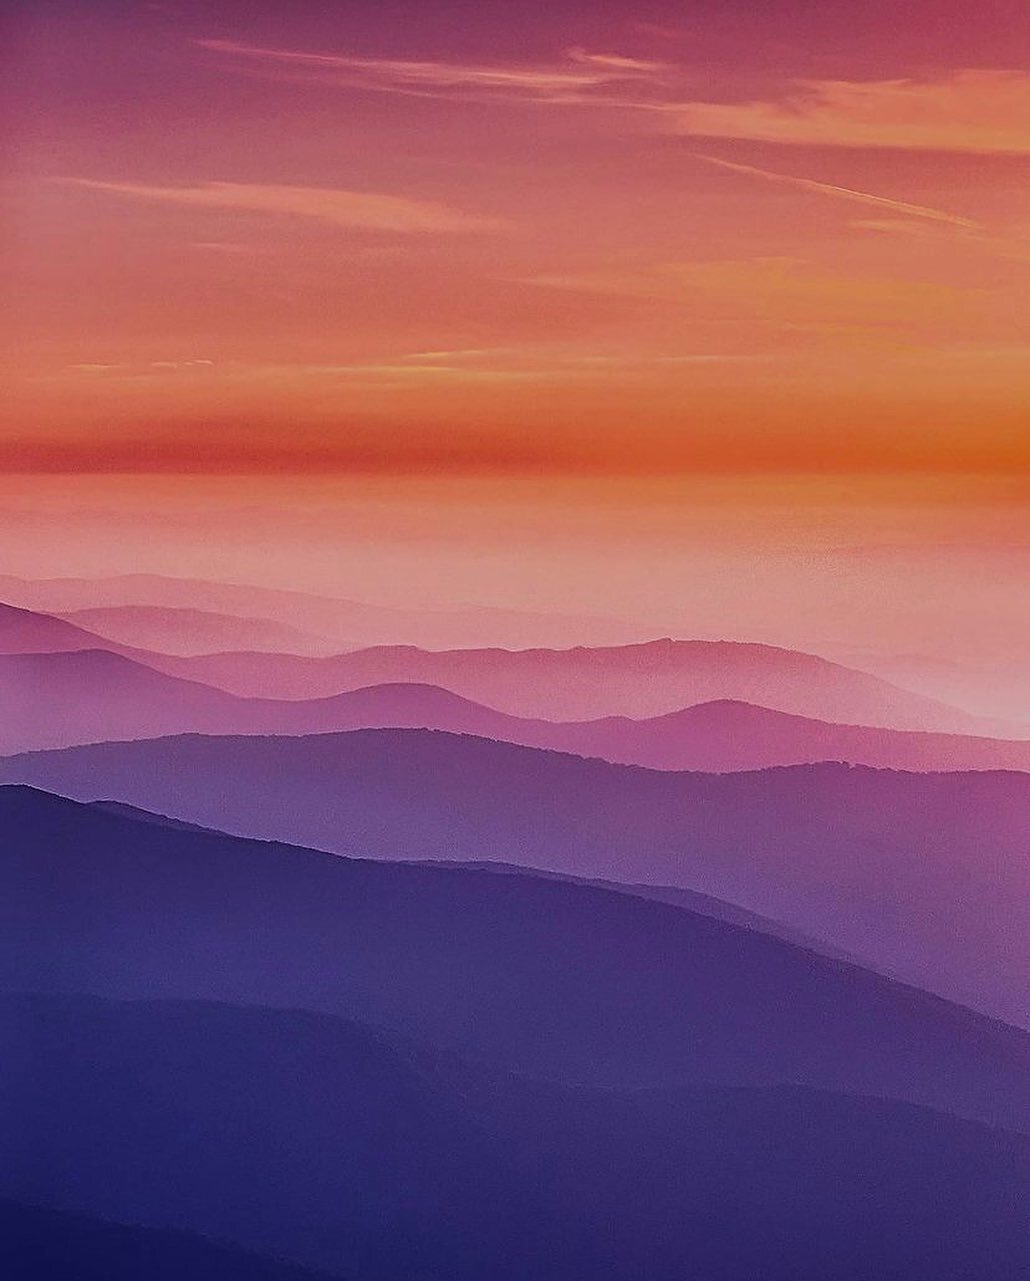 What an Incredible Sunset 🌅 

Taken by the amazing @ashleylee.co 

Tag us and use #828isgreat for a chance to be featured🏕

#booneview #leavenotrace  #theoutbound #blueridgemoments #roamtheplanet #earthoutdoors #asheville #northcarolina #blueridgem